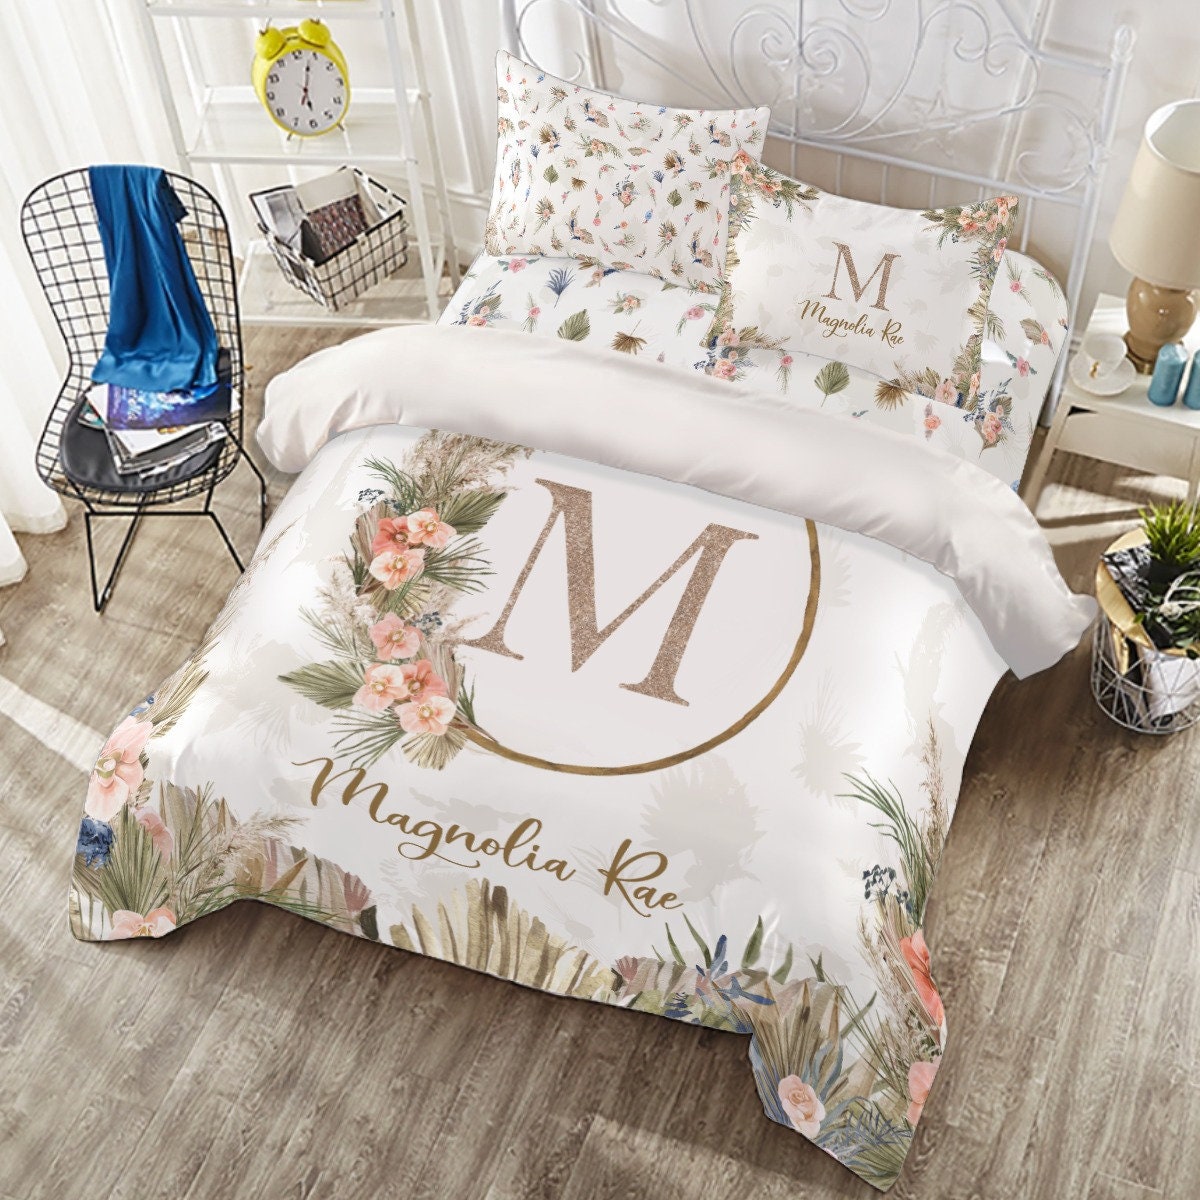 Personalized Stitch comforter with first name – MyLittleCrea